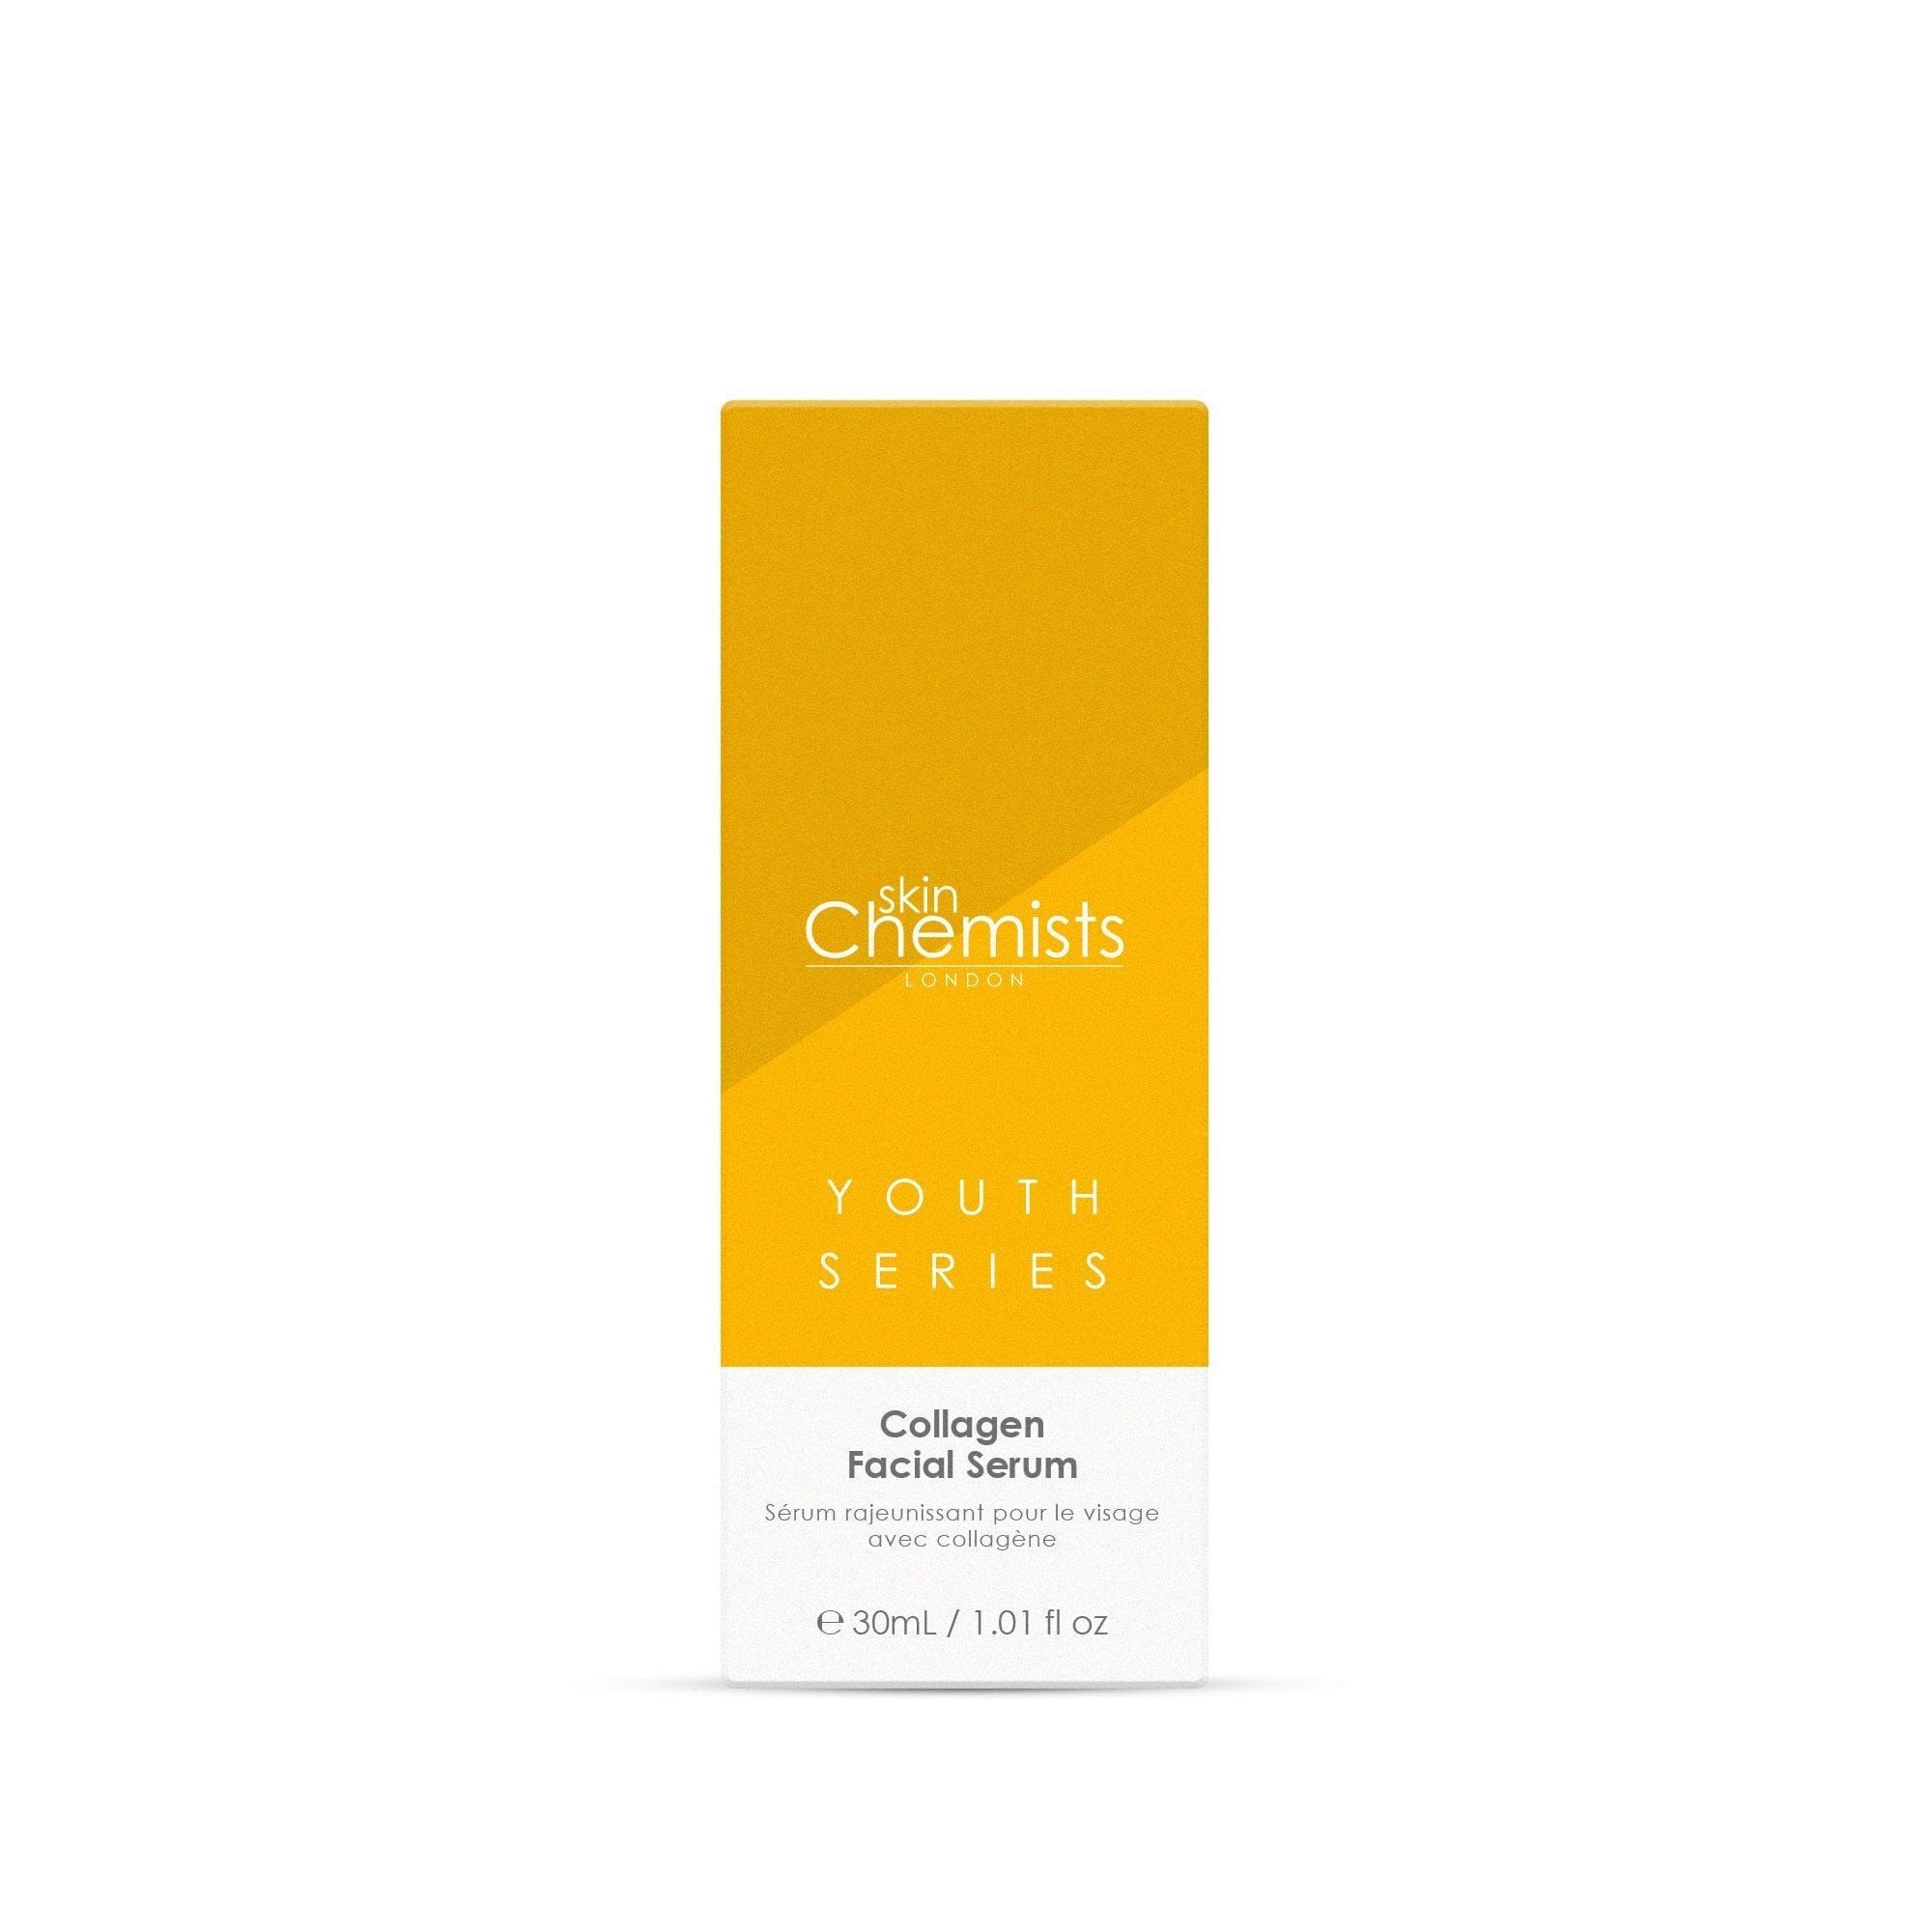 skinChemists Youth Series Collagen Facial Serum